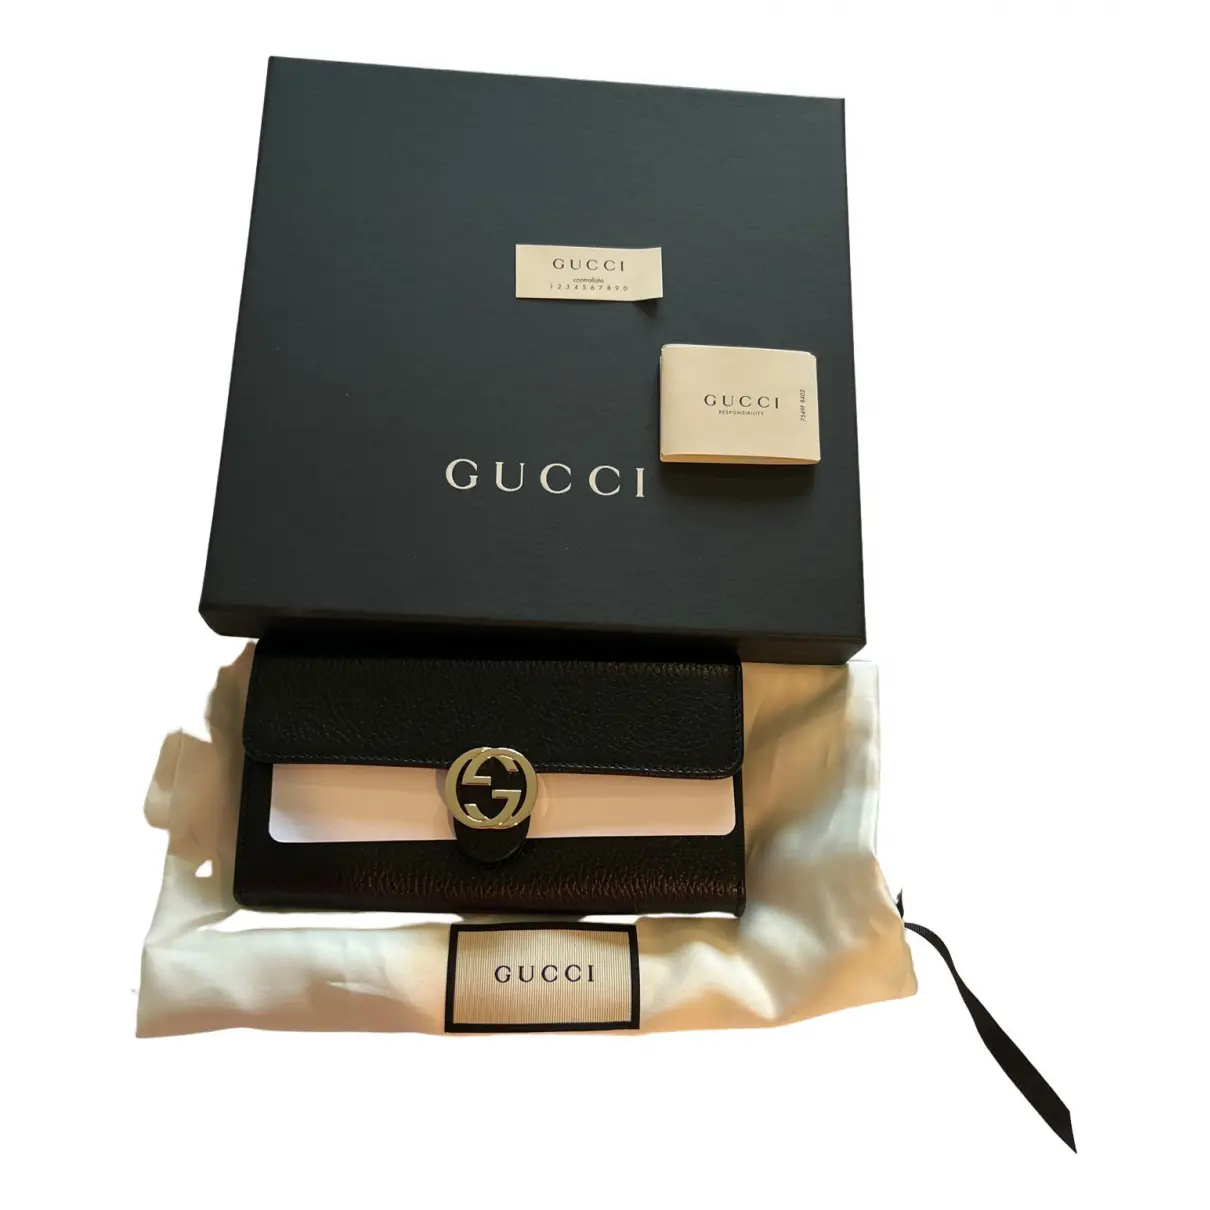 Buy Gucci Marmont patent leather clutch bag online